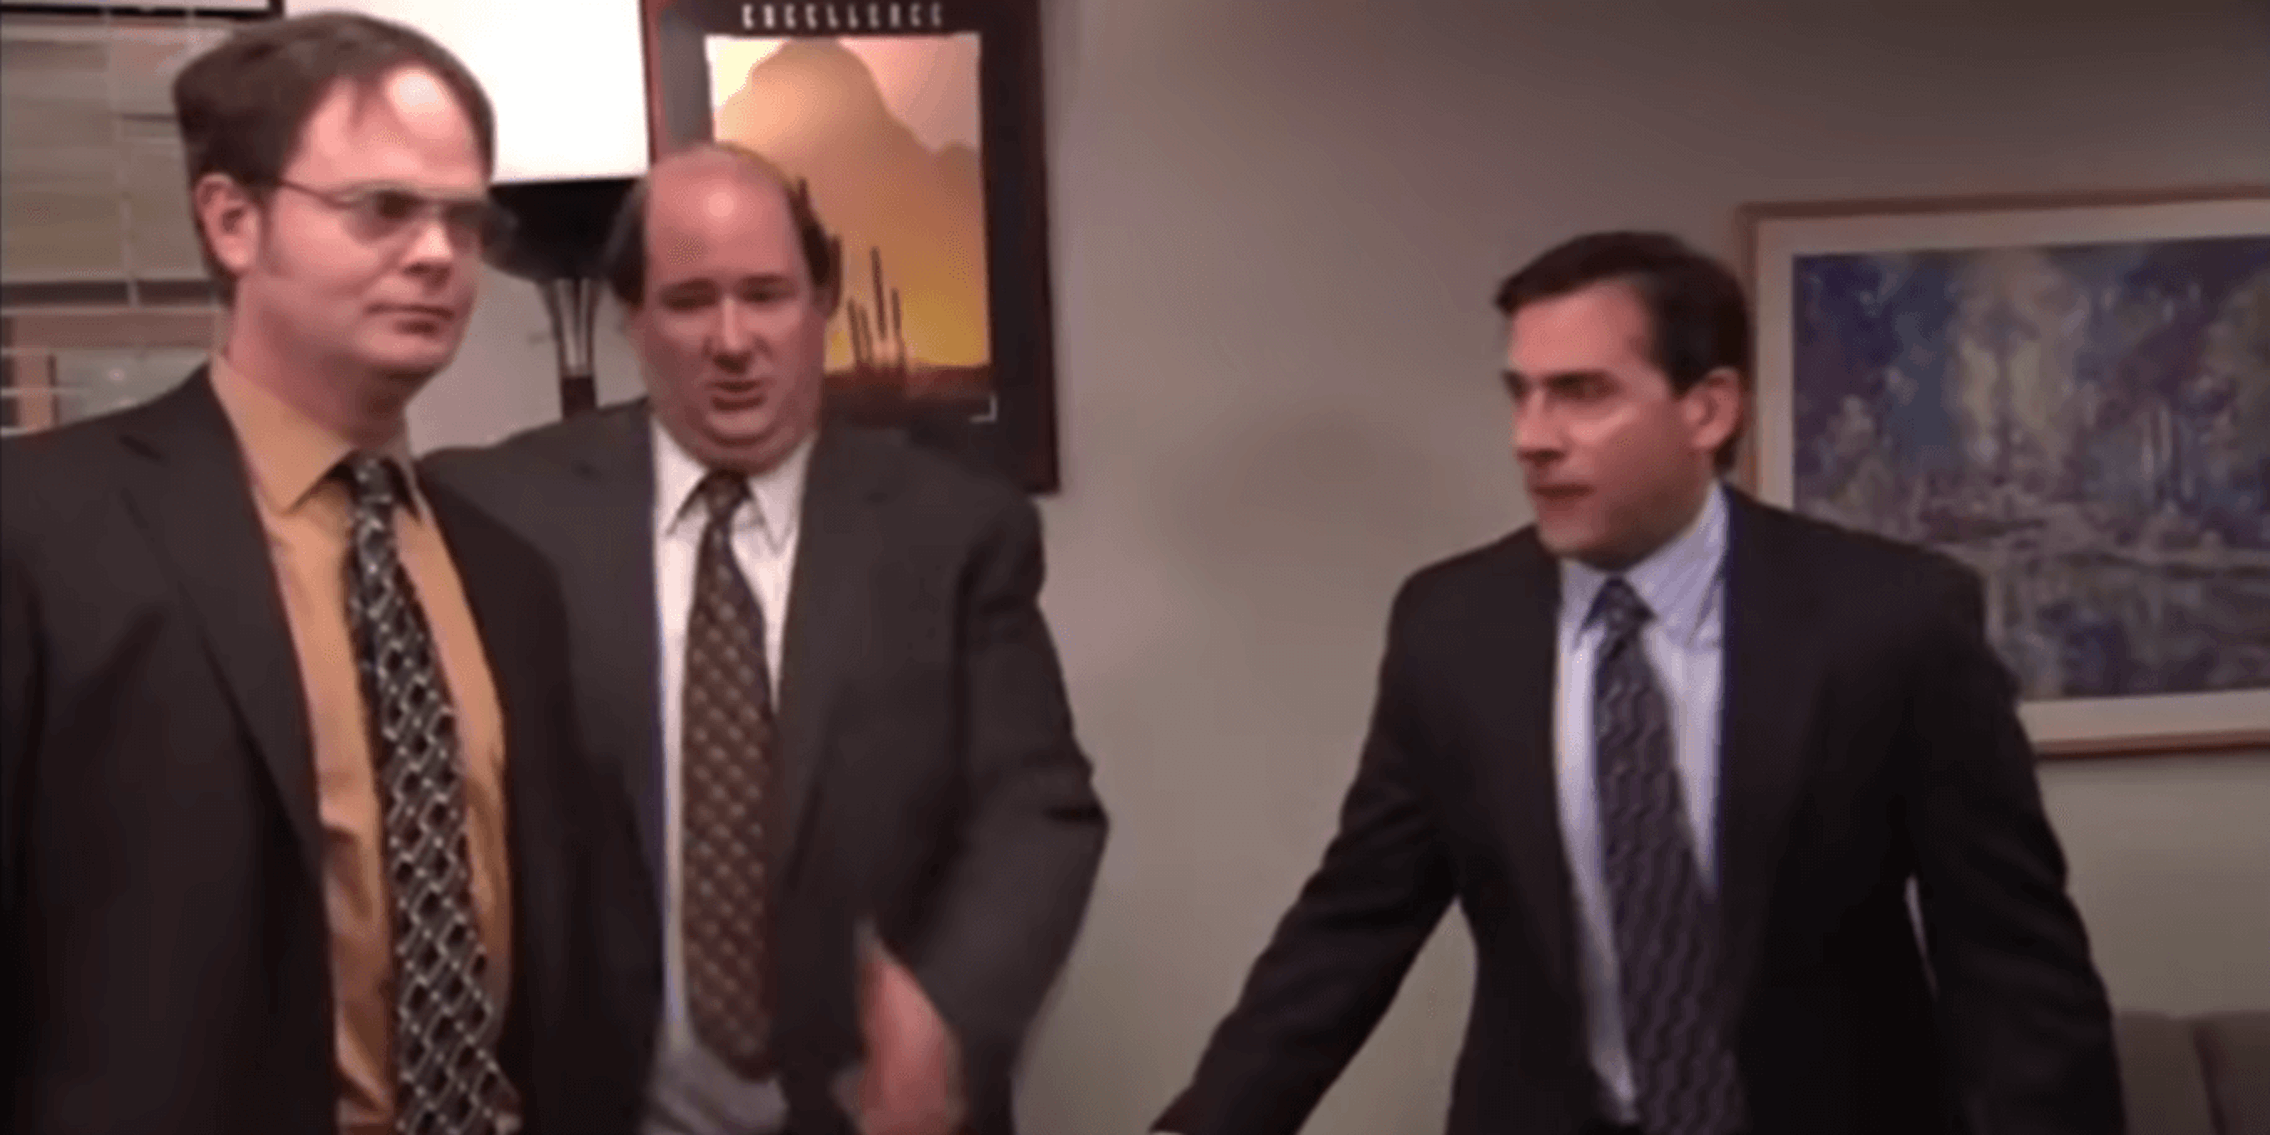 Where To Watch 'The Office' Online: Price guide and more (MAY 2020)